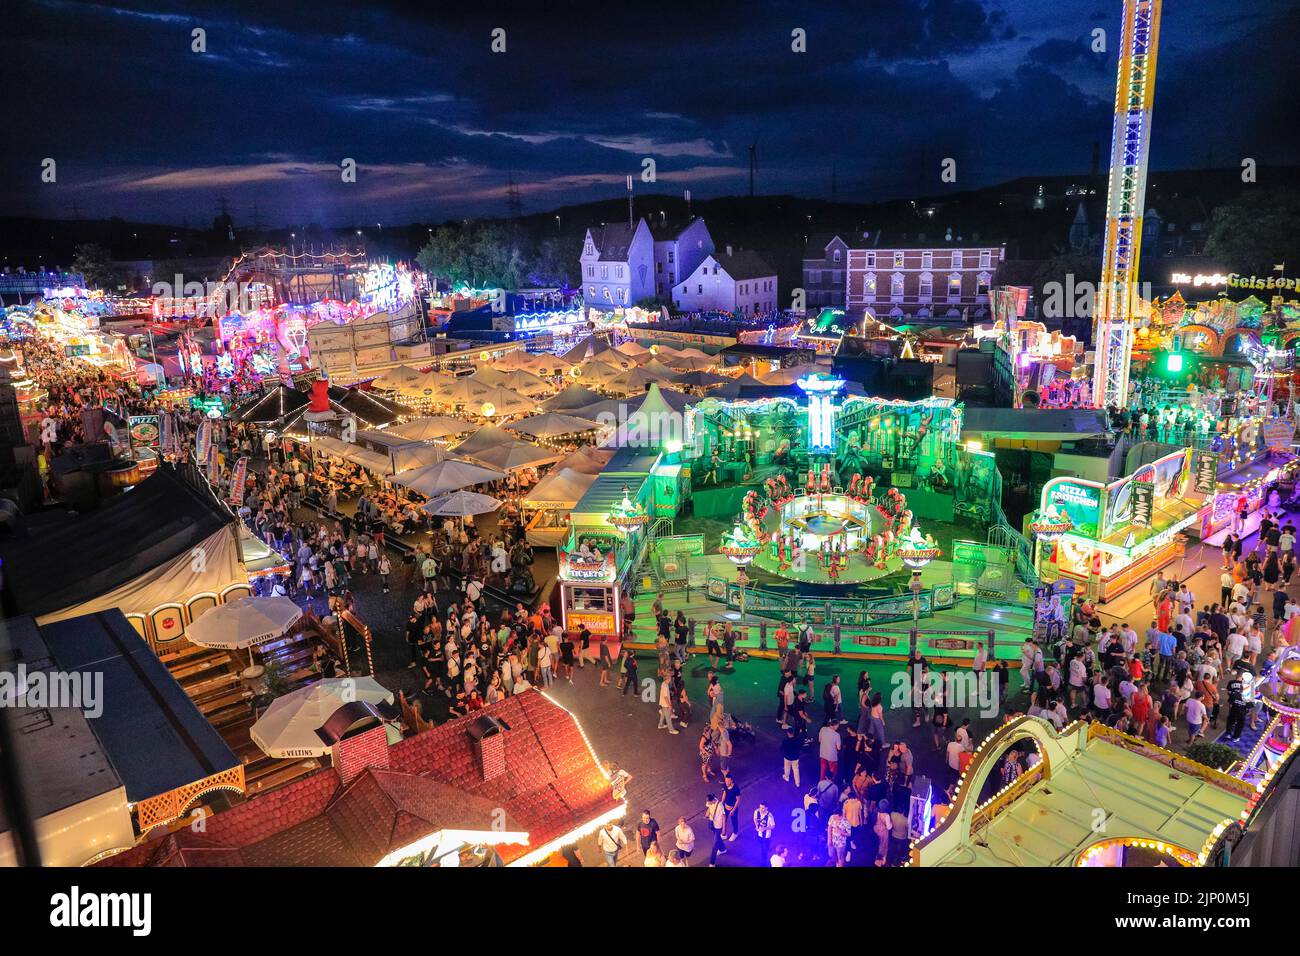 Herne, NRW, Germany. 14th Aug, 2022. People scream and laugh on the illuminated, 85m high 'Hangover - The Tower' thrill ride. Cranger Kirmes, Germany's 3rd largest funfair with a tradition dating back to the middle ages, has returned to pre-pandemic visitor numbers with more than 3.9m attending in hot, sunny weather, enjoying the rides, rollercoasters, beer halls, food and drink. The funfair concluded tonight with fireworks over the nearby Rhine-Herne Canal. Credit: Imageplotter/Alamy Live News Stock Photo